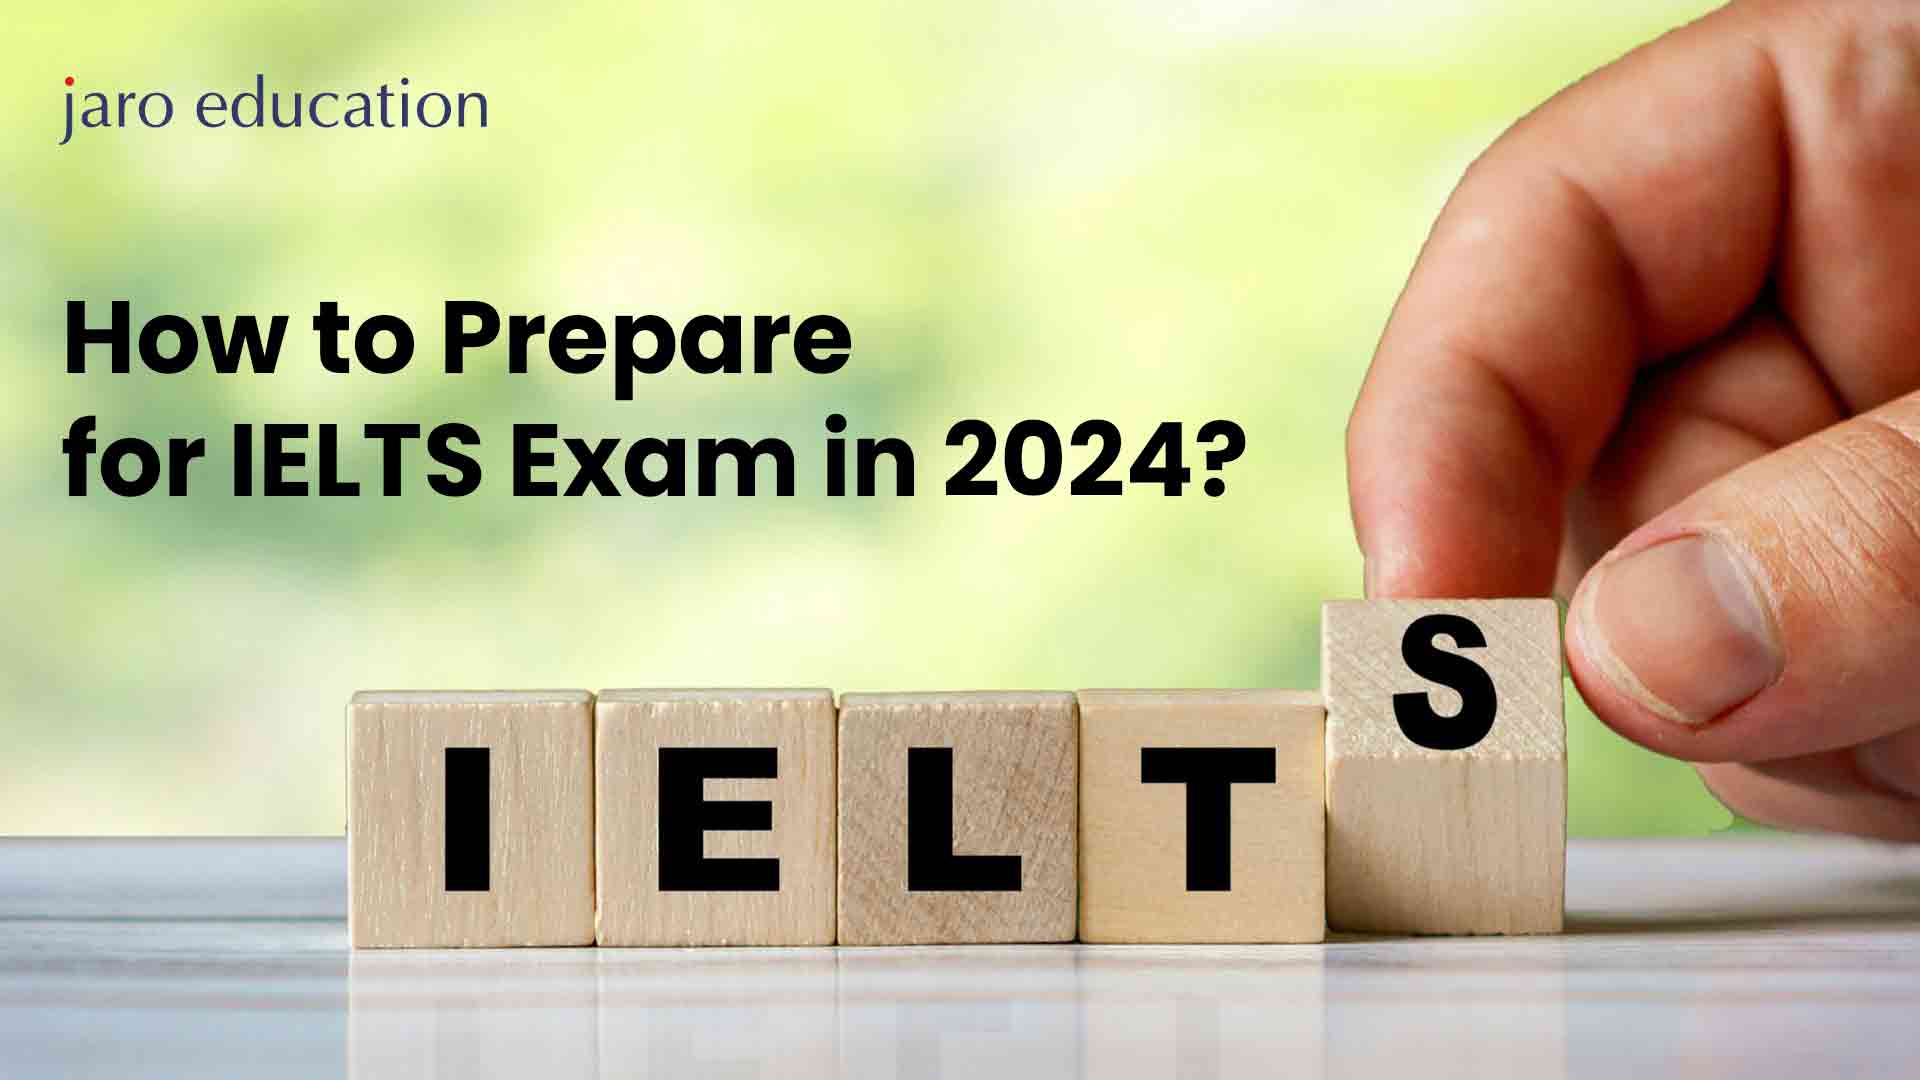 How to Prepare for IELTS Exam in 2024